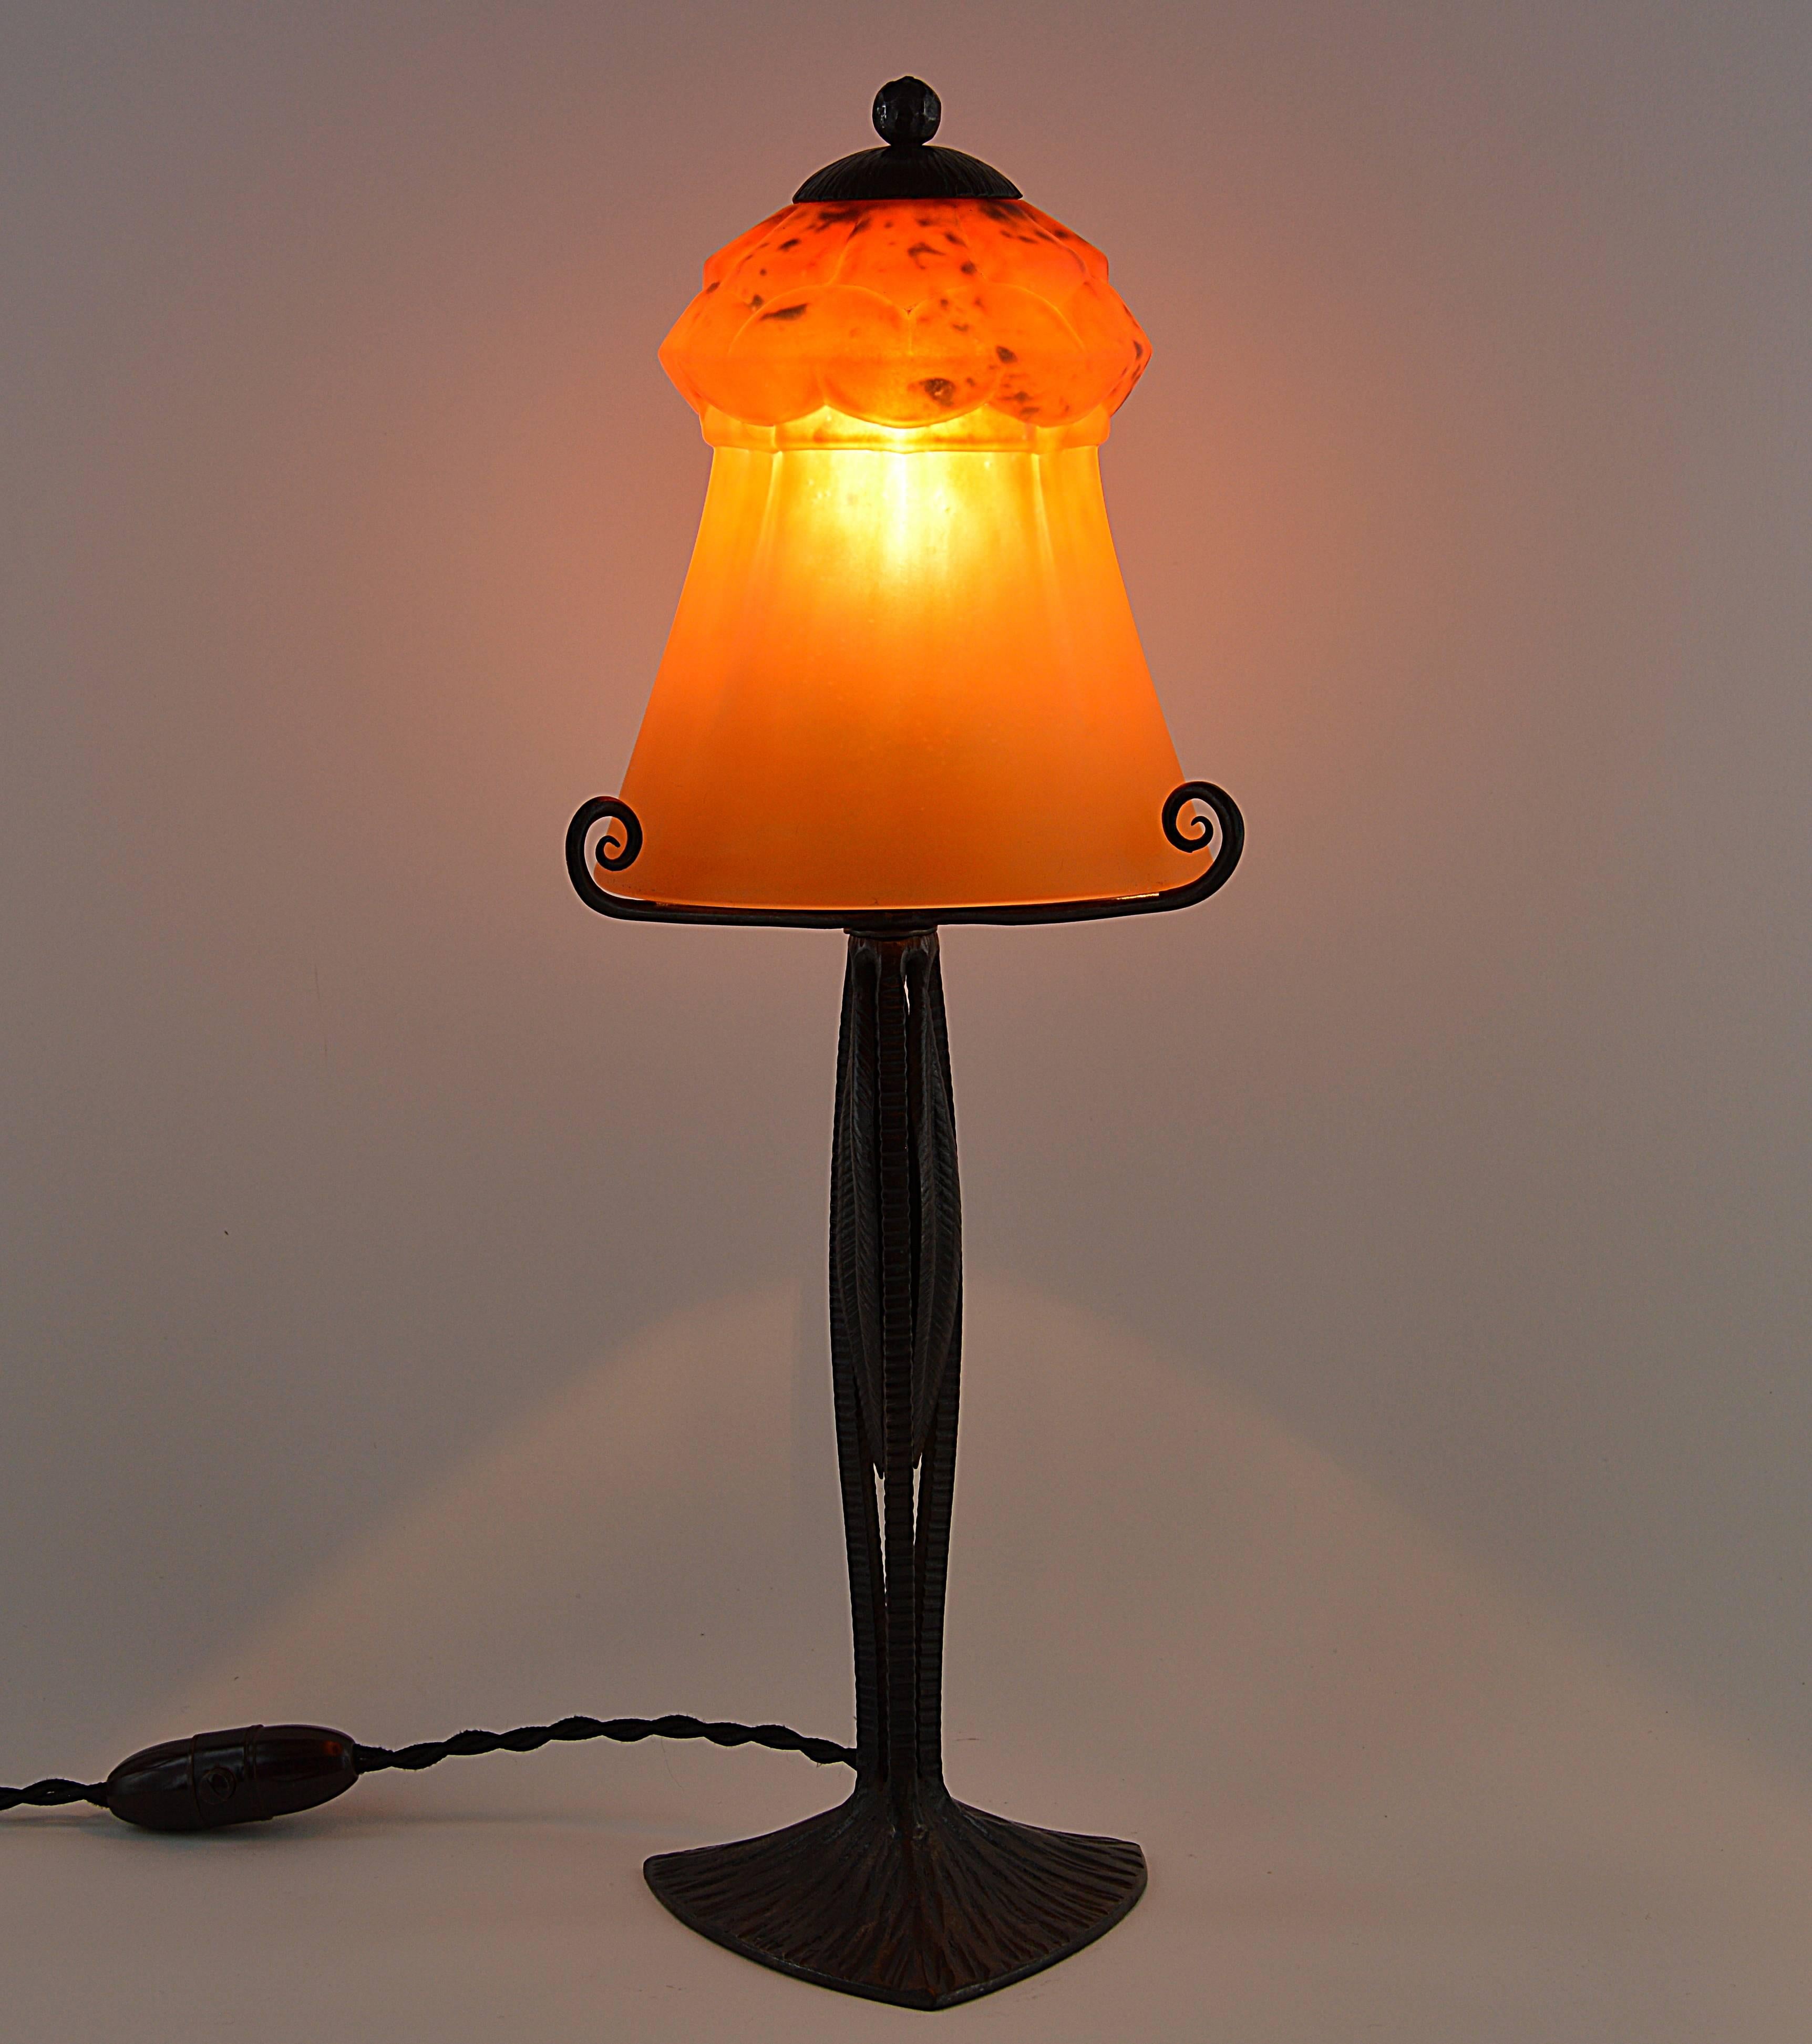 French Art Deco table lamp by Charles Schneider (Epinay-sur-Seine, Paris) and Henri Fournet (Lyon), France, circa 1925. This large blown molded glass shade made by Charles Schneider comes on its original wrought iron base. The glass shade was made